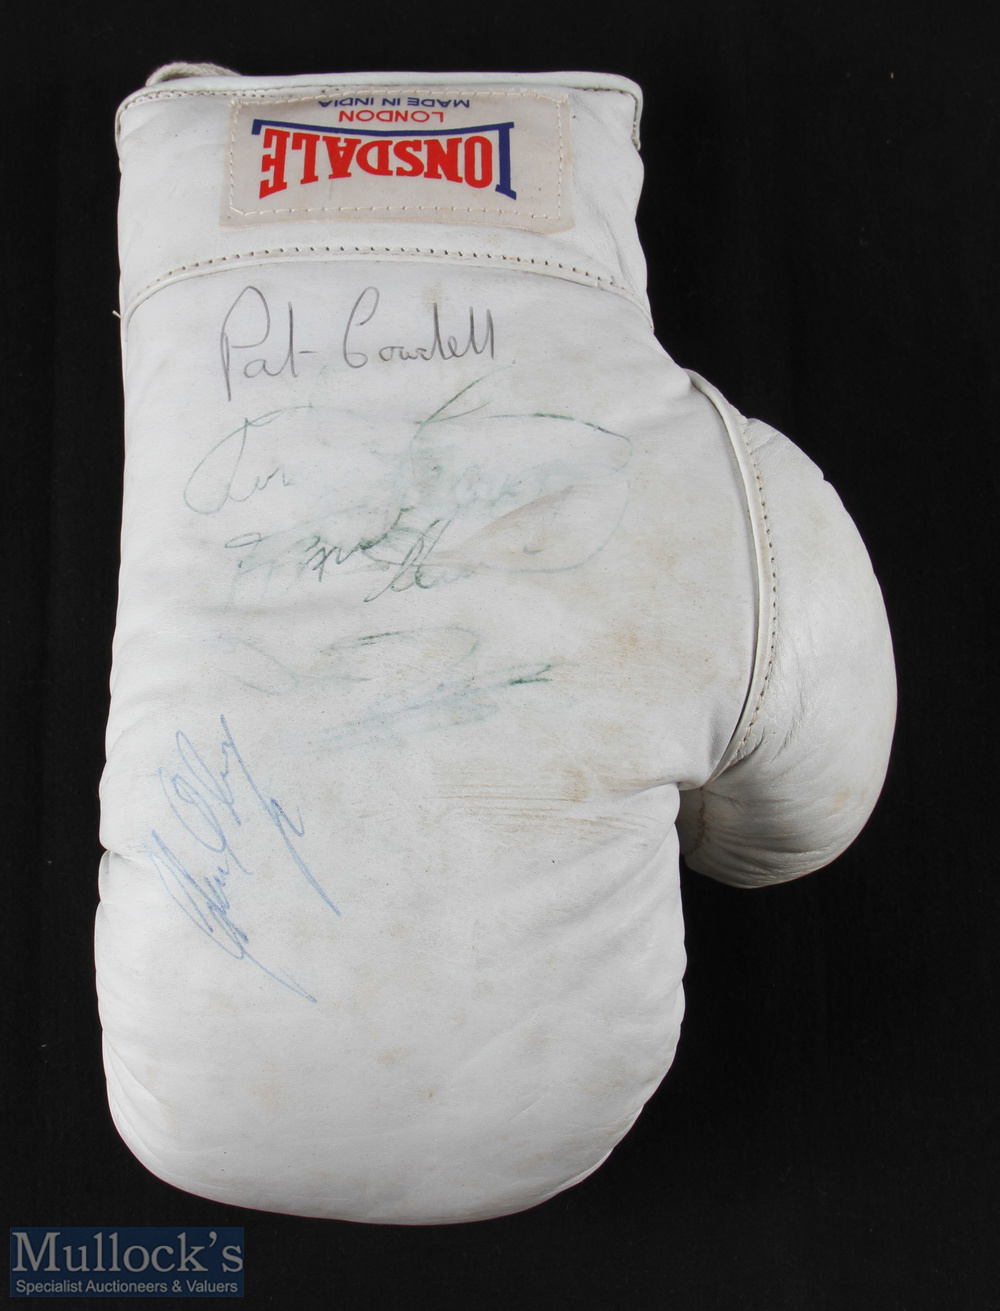 Glen McCrory Pat Cowdell signed Lonsdale Boxing Gloves, a pair of boxing gloves multi signed with - Image 2 of 2